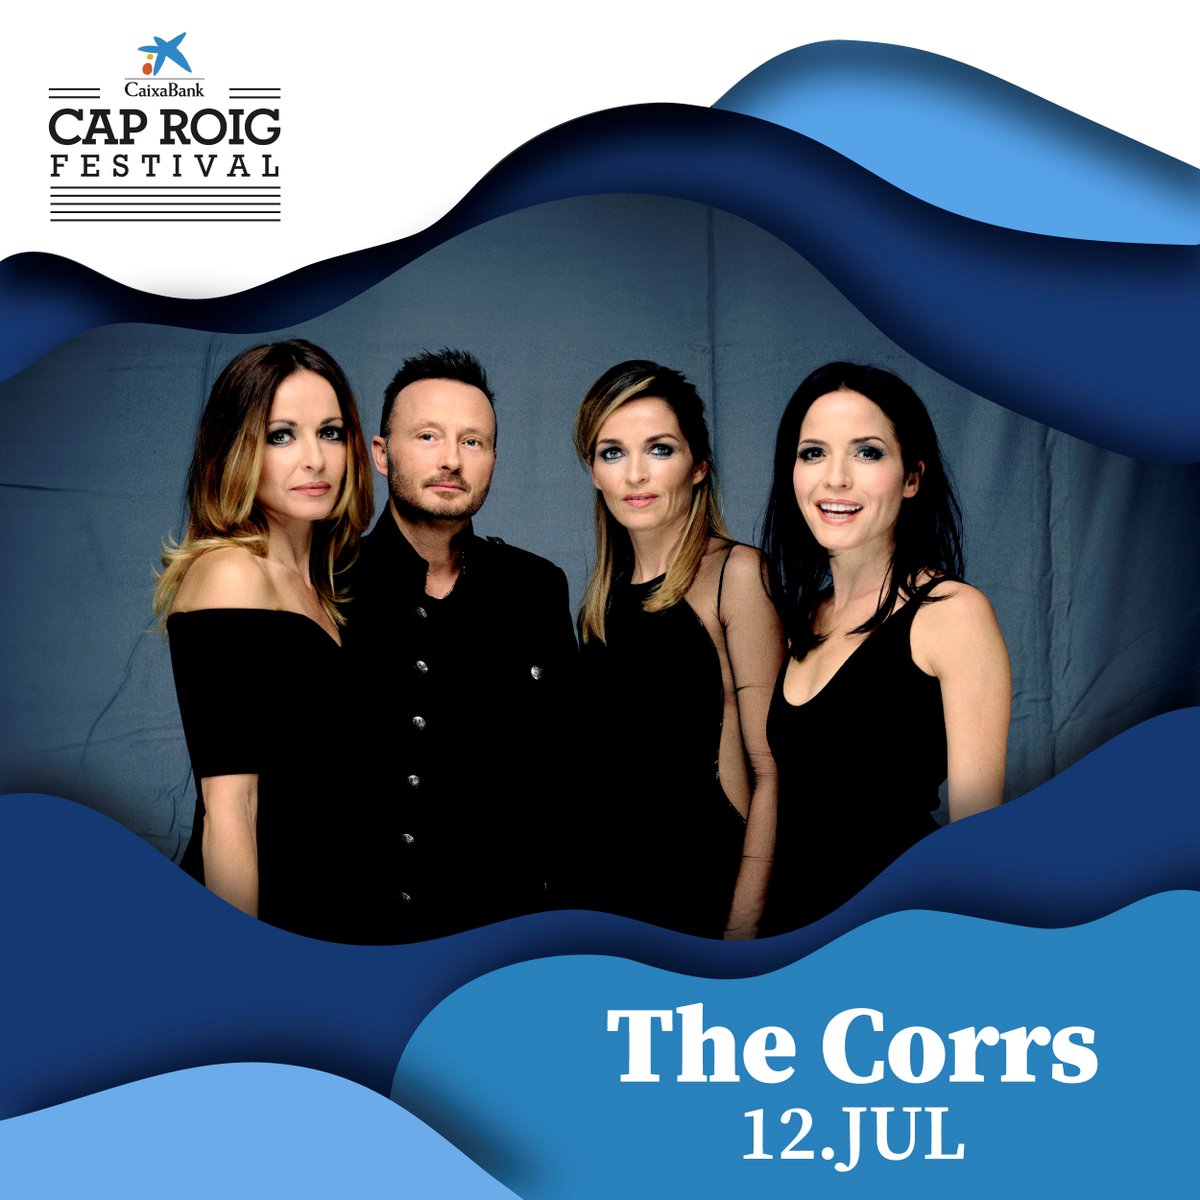 A second festival date in Spain! This time we're heading to Girona to play the @CapRoigFestival series of concerts on Friday 12th July. Tickets on sale Monday morning.